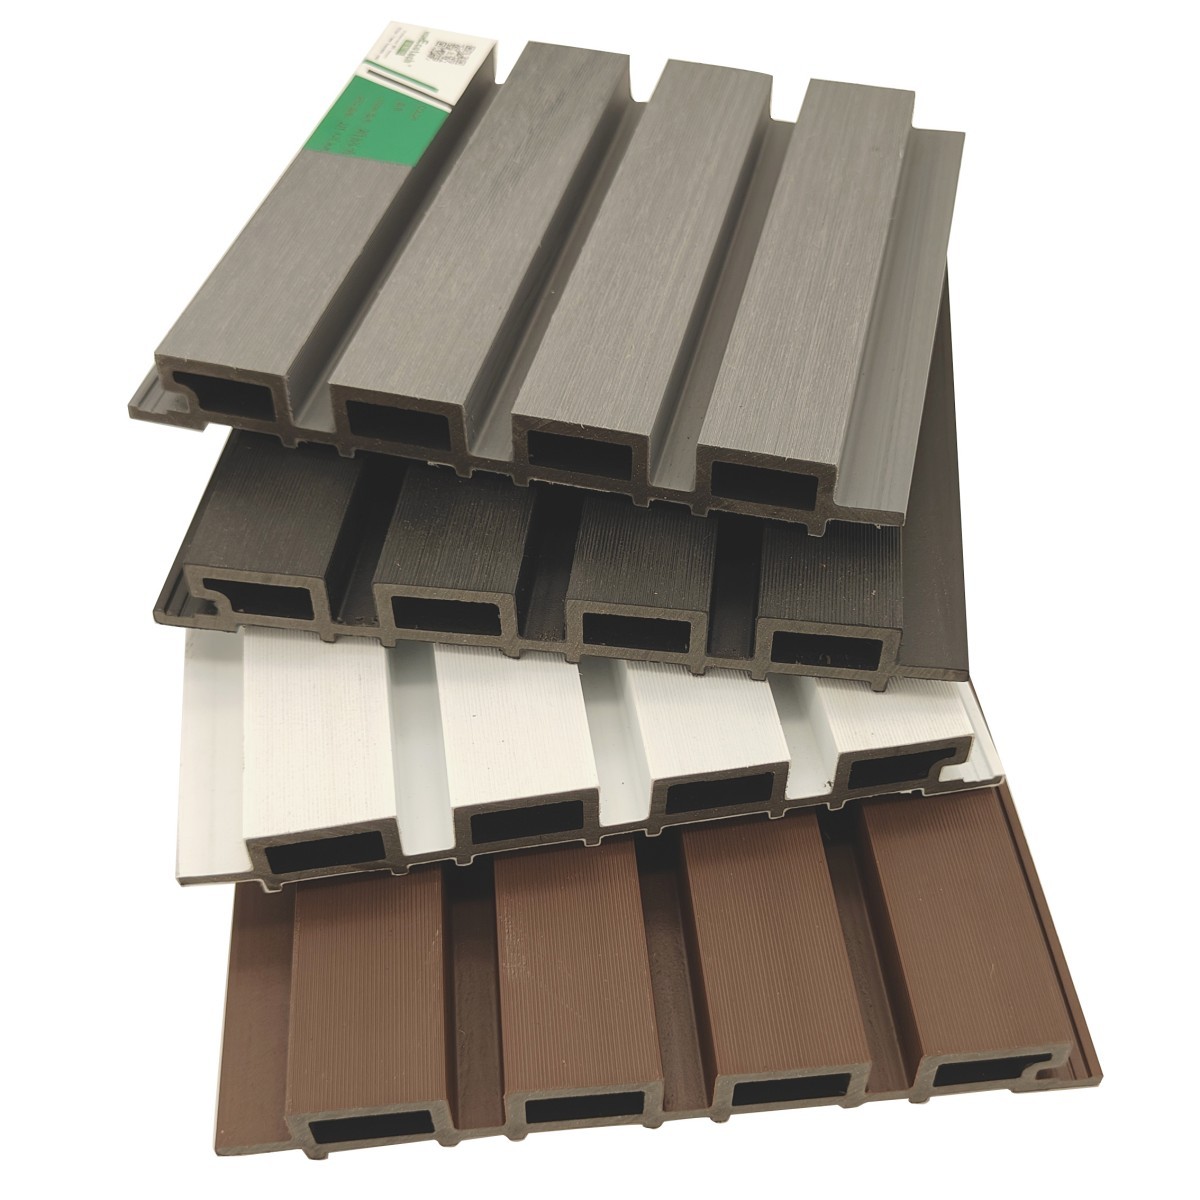 Wood plastic co-extrusion grooved cladding panel